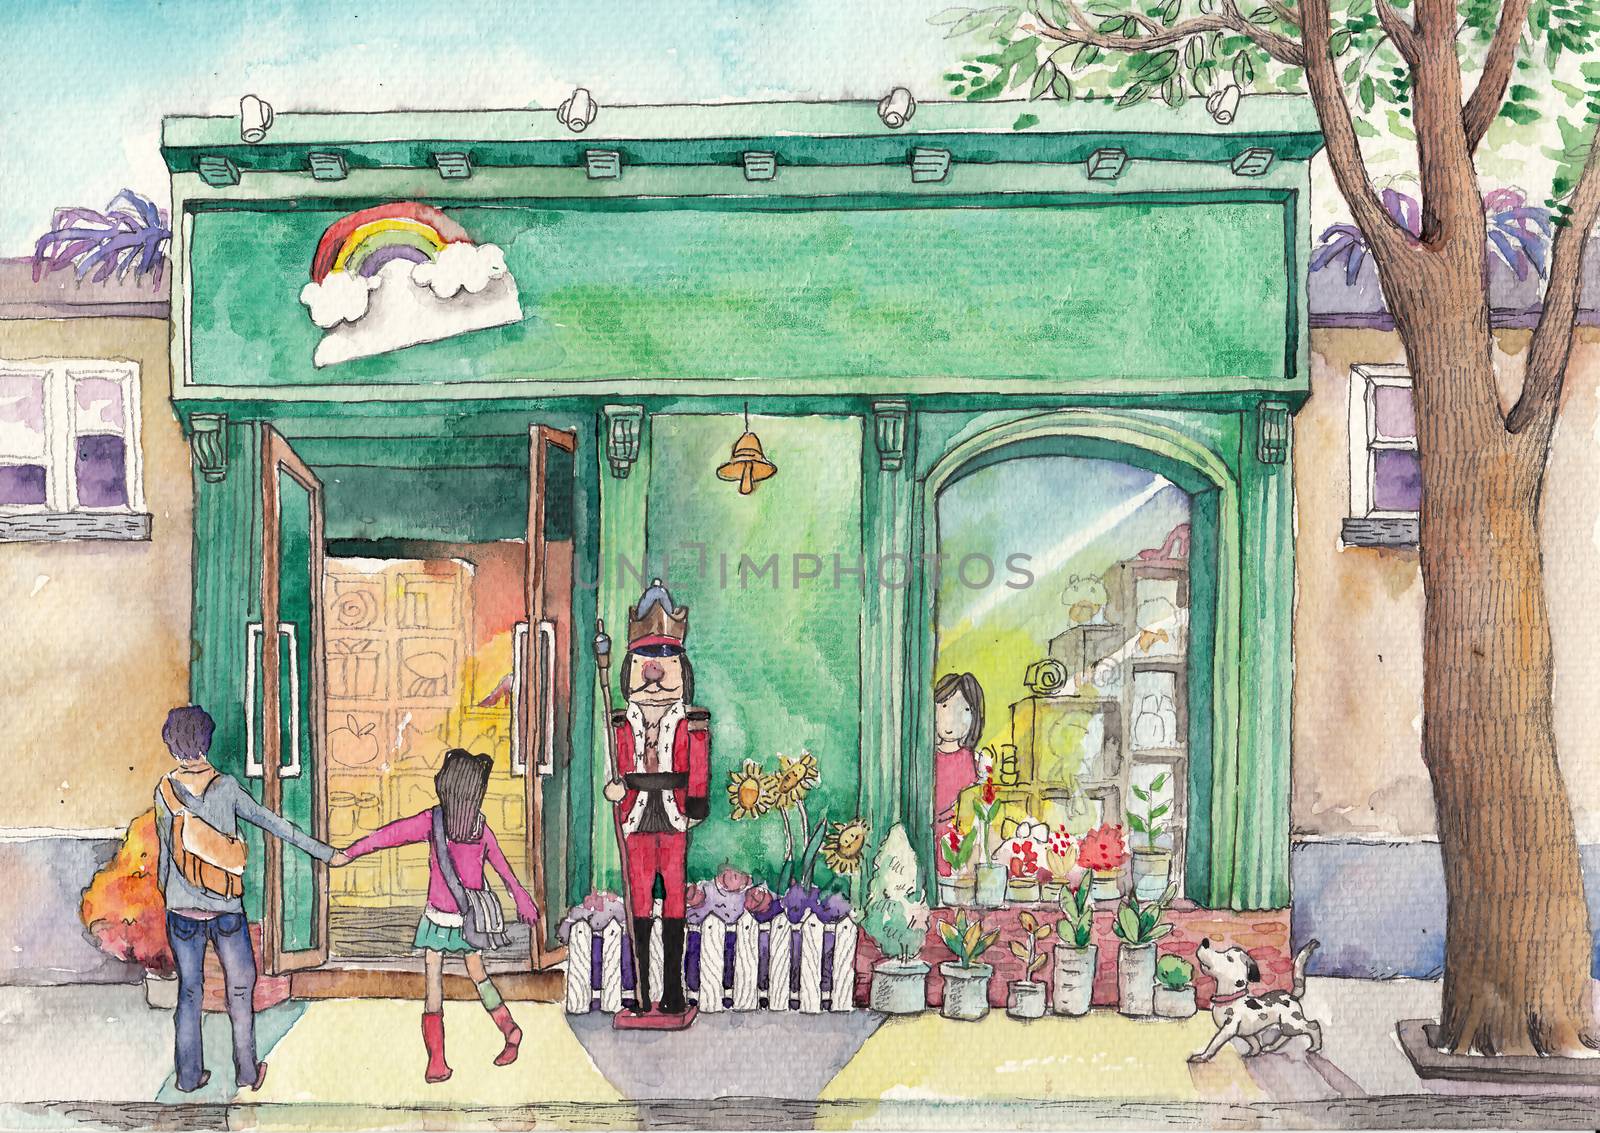 Watercolor High Definition Illustration: "Let's go." "No, Let me take a look." The Young Couple in front of a Street Shop. Fantastic Cartoon Style Scene Wallpaper Background Design with Story. by NextMars